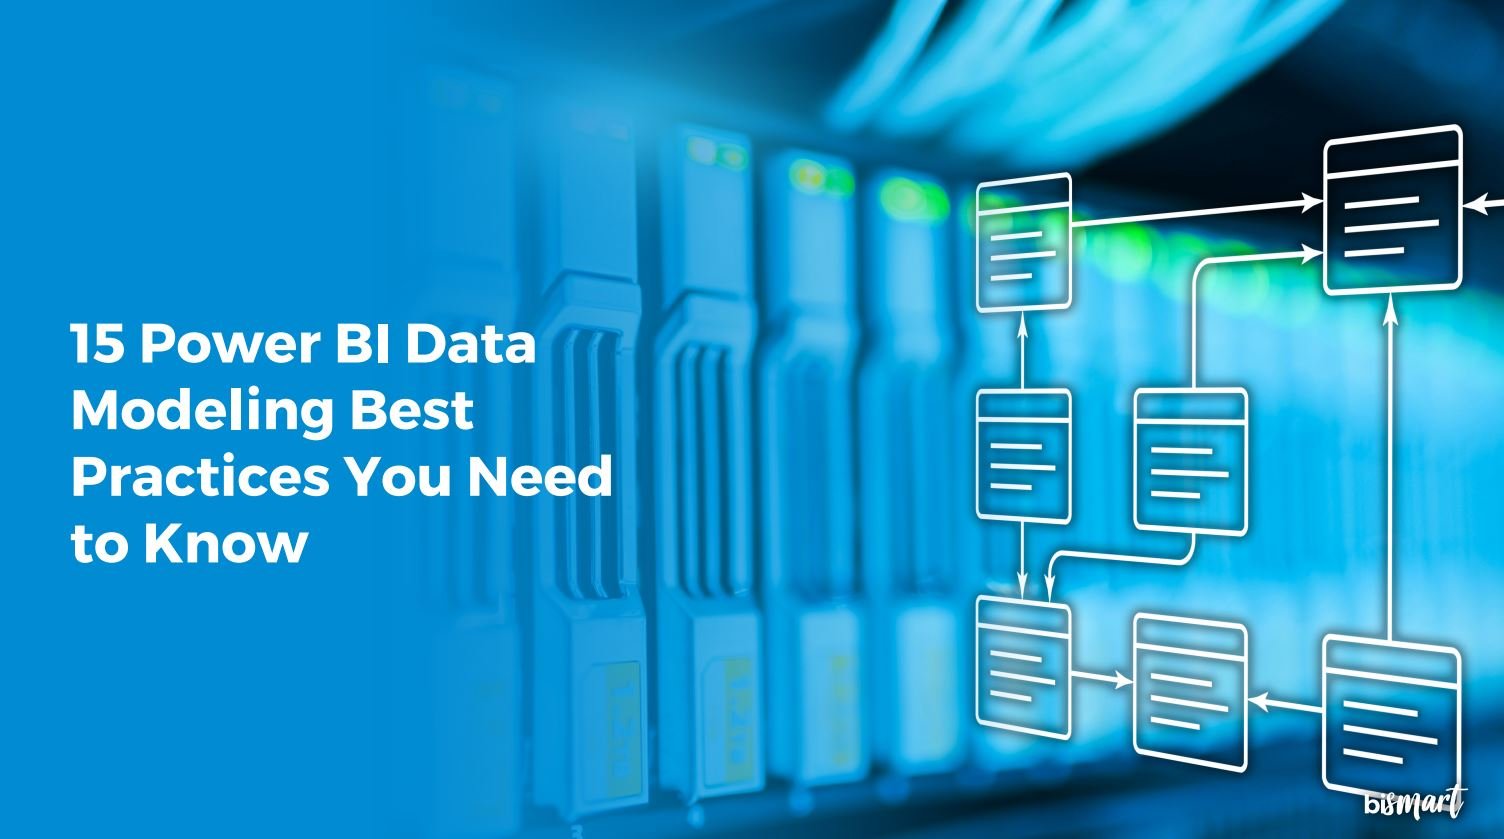 15 Power BI Data Modeling Best Practices You Need to Know